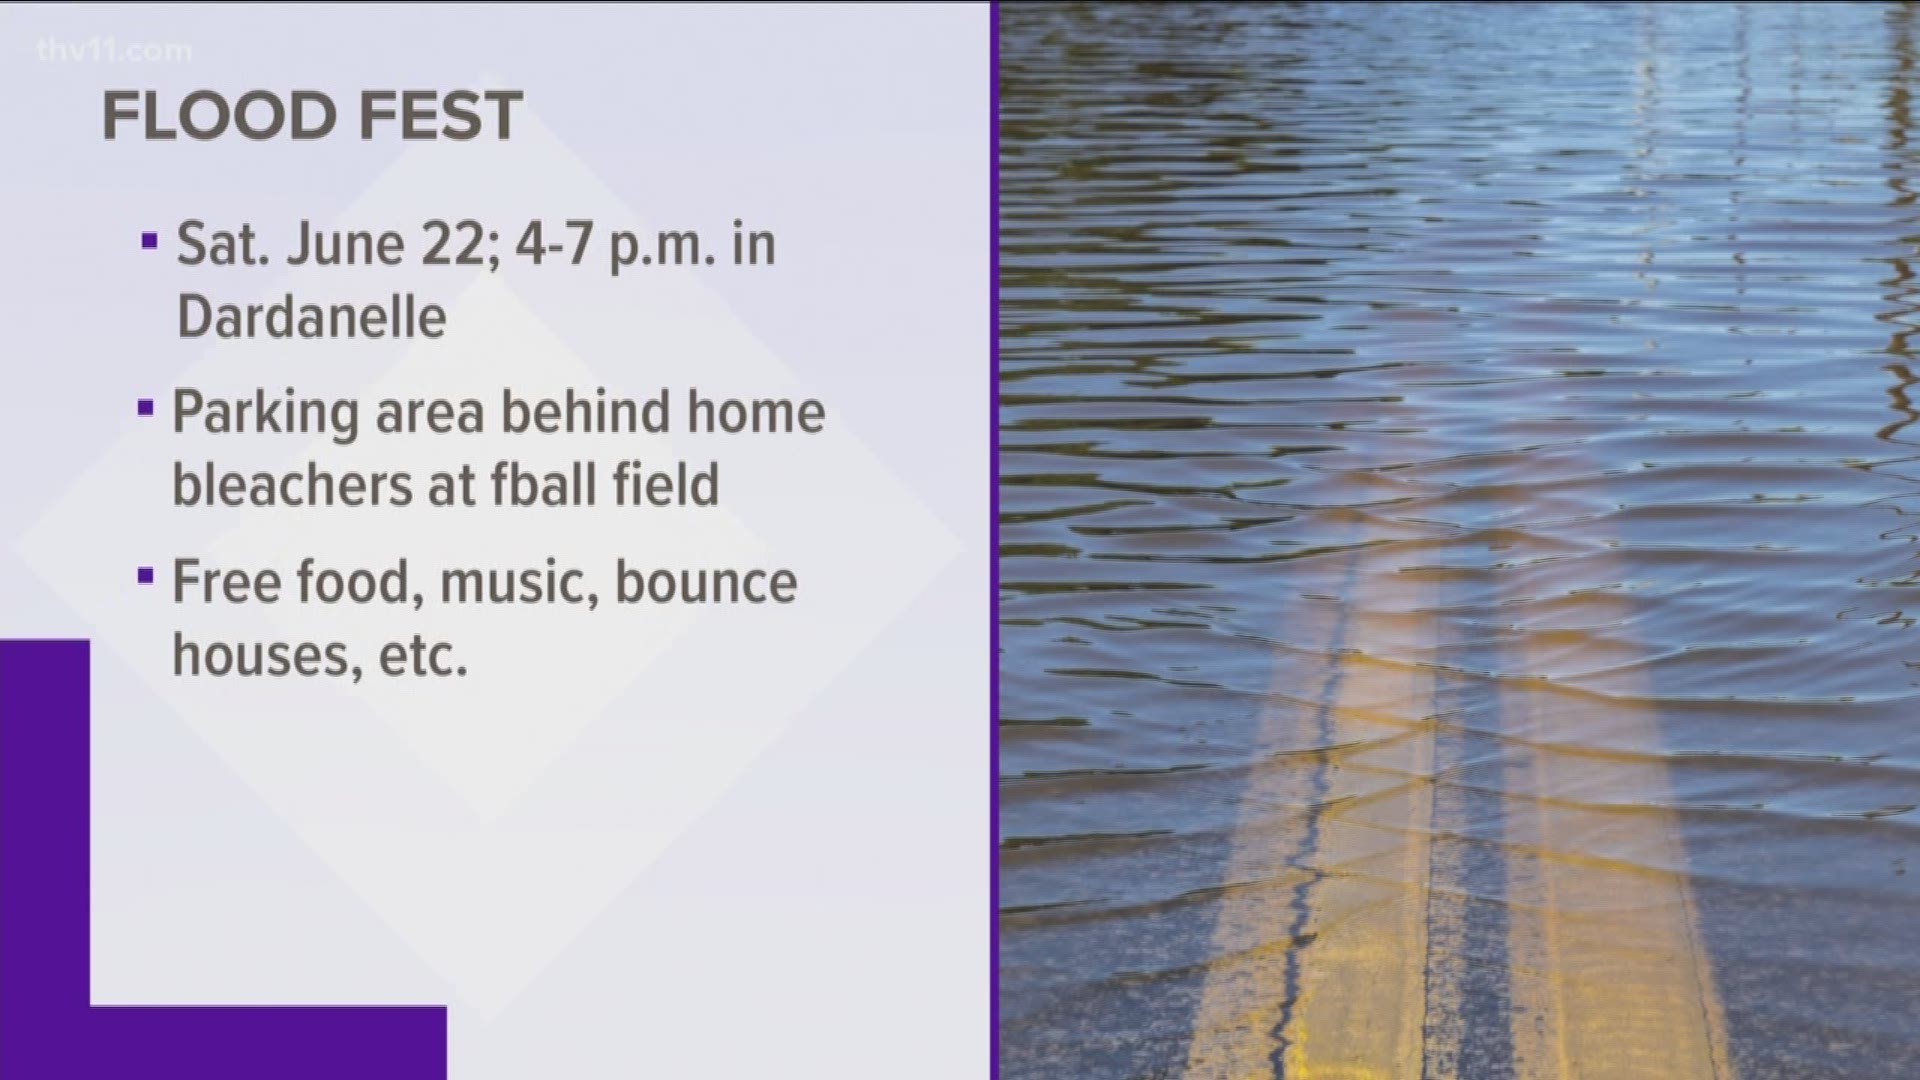 Flood Fest is meant to honor the community's resilience through the historic Arkansas River flooding.